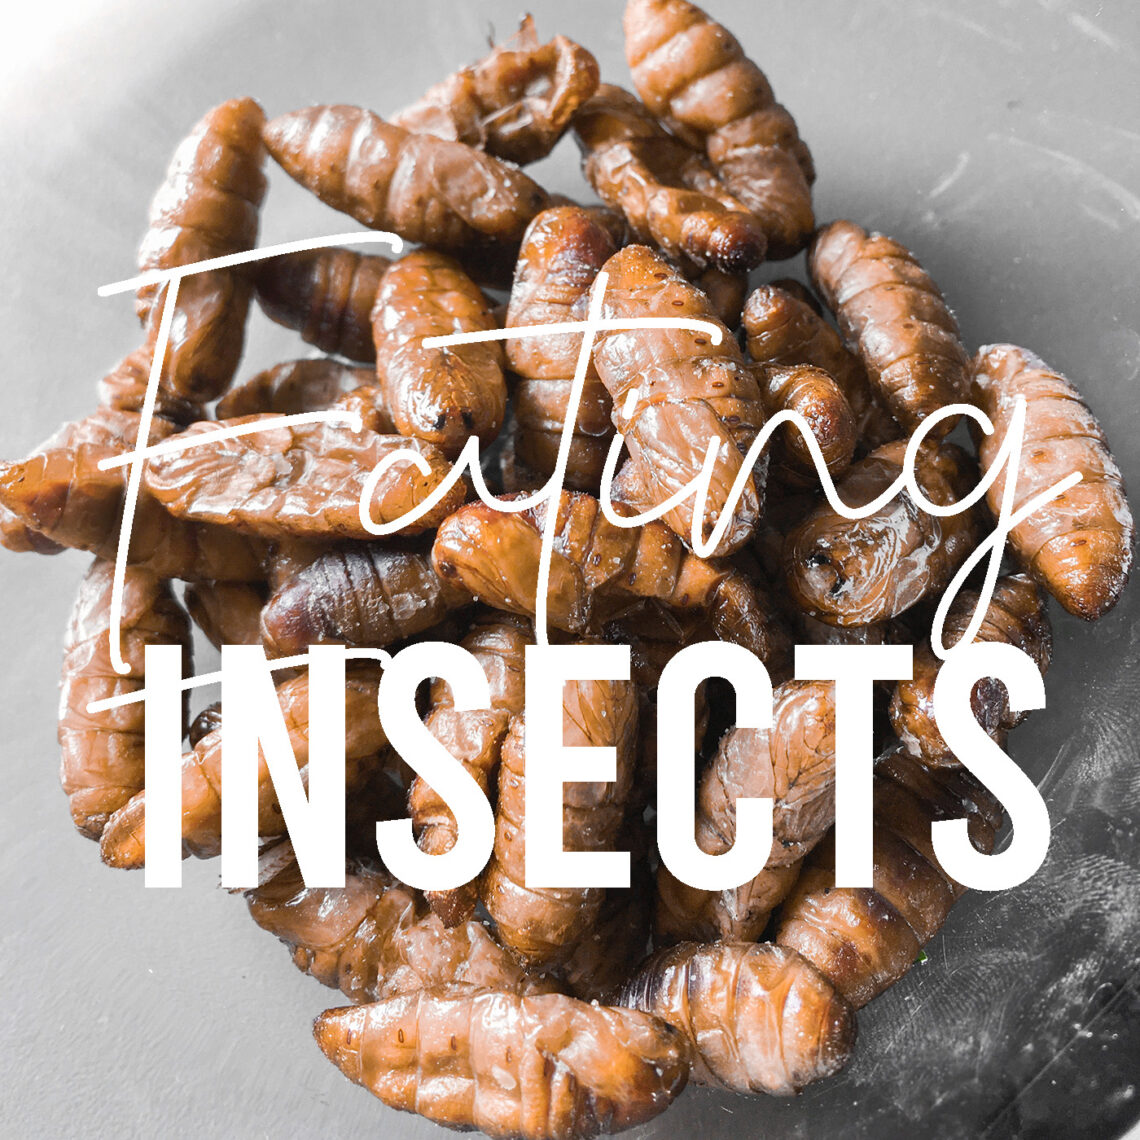 Disadvantage of eating insects